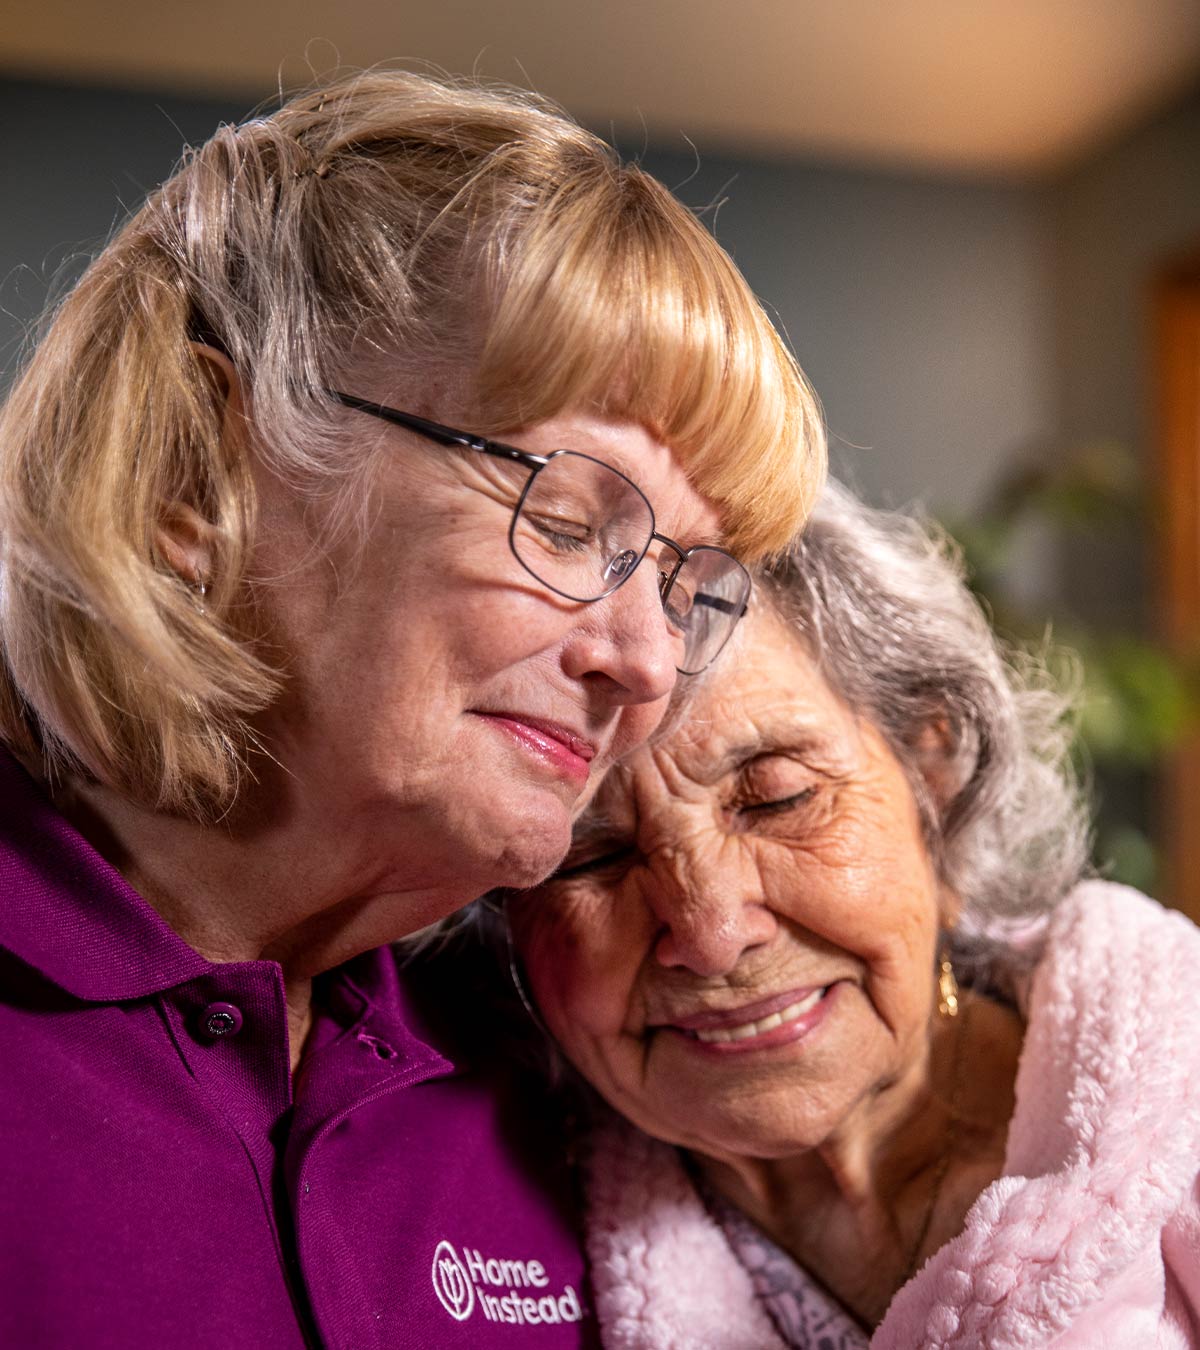 CAREGiver providing in-home senior care services. Home Instead of Pittsburgh, PA provides Elder Care to aging adults. 